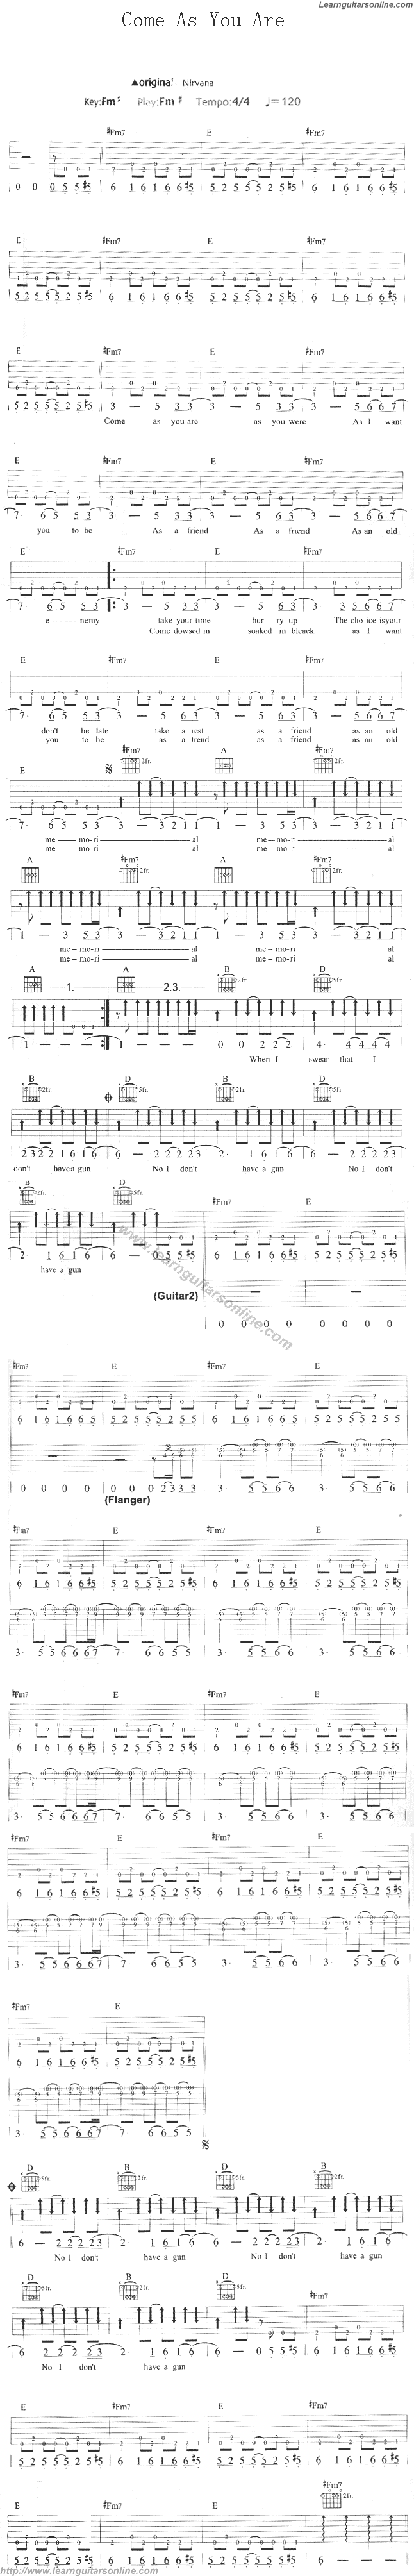 Come As You Are by Nirvana Guitar Tabs Chords Solo Notes Sheet Music Free